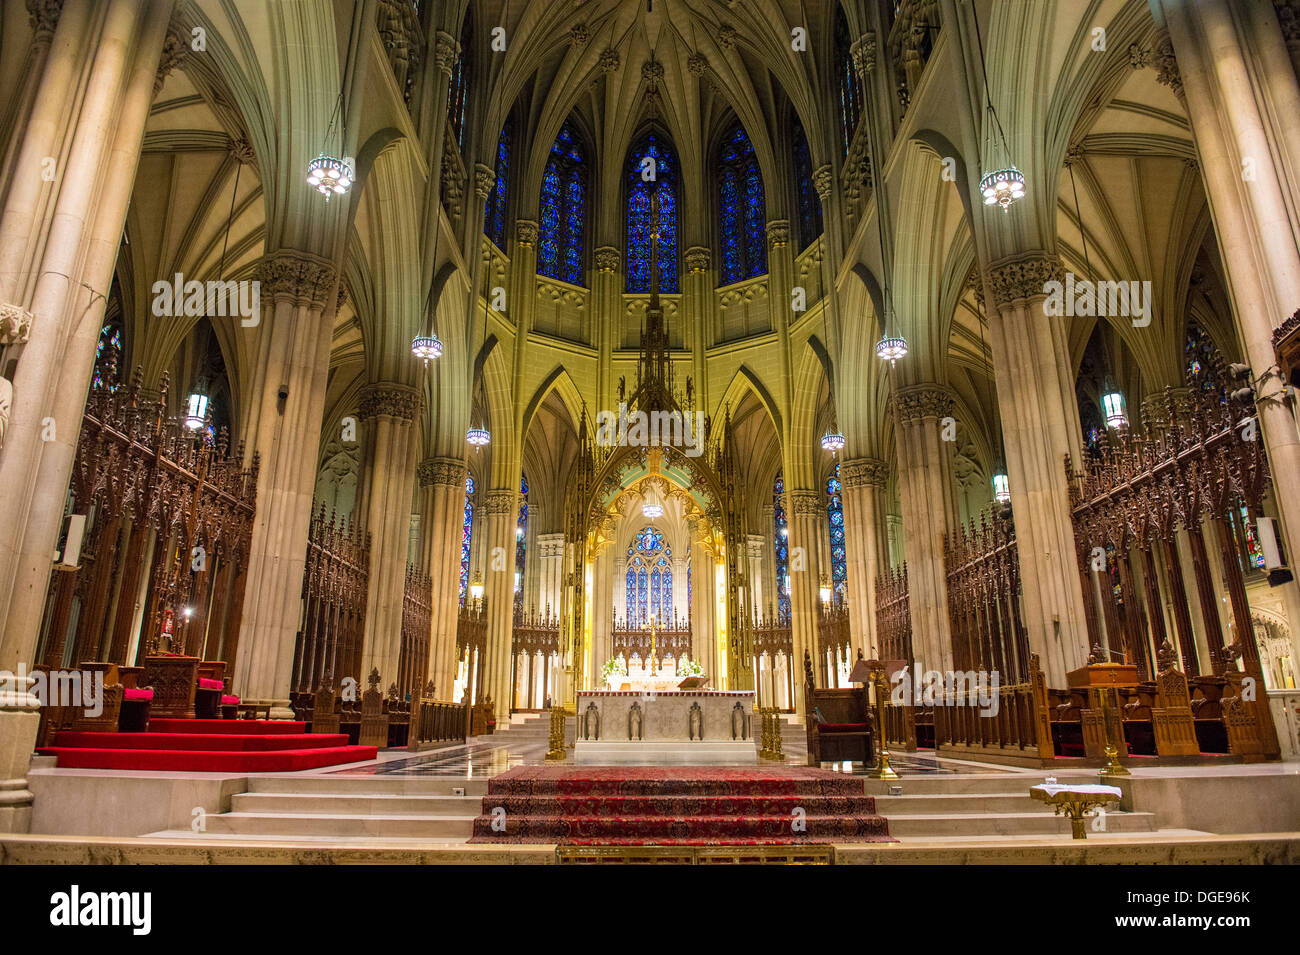 Interior of St. Patrick's Cathedral, a Neogothic Roman Catholic Cathedral in New York City. Stock Photo